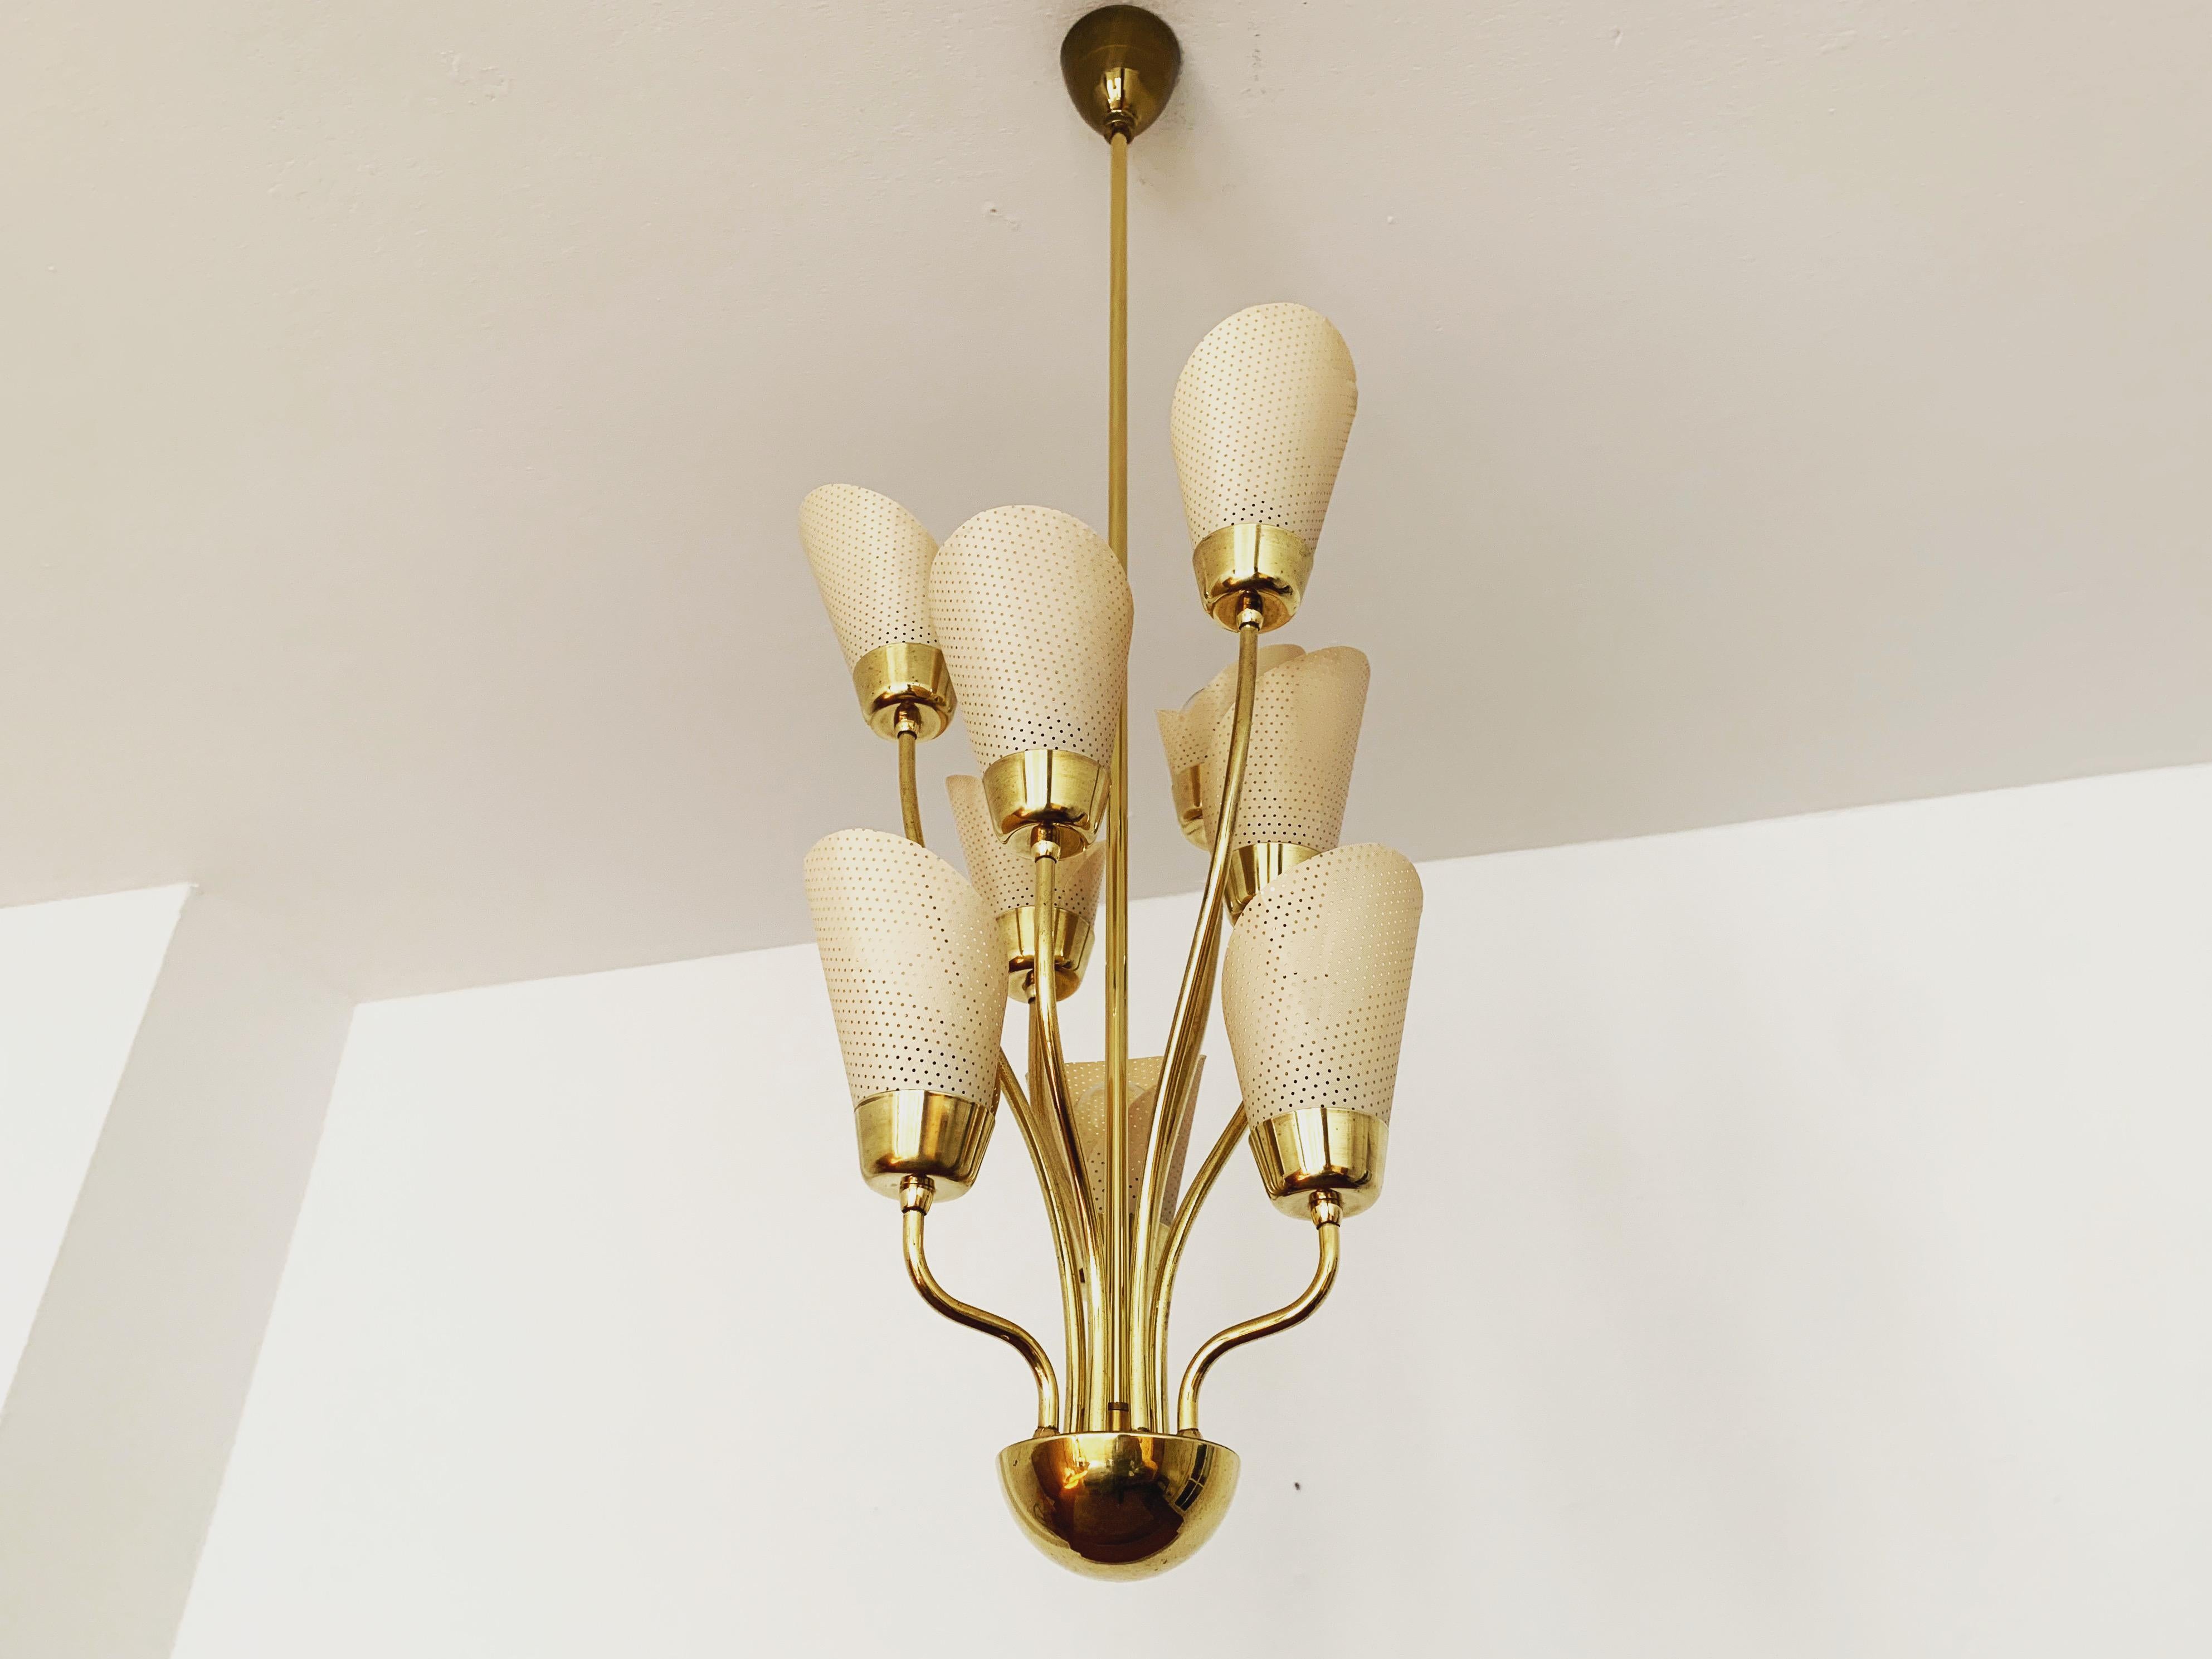 Exceptionally beautiful and stylish chandelier from the 1950s.
Very decorative and of high quality.
Wonderful design and an asset to any home.

Condition:

Very good vintage condition with slight signs of wear consistent with age.
The brass